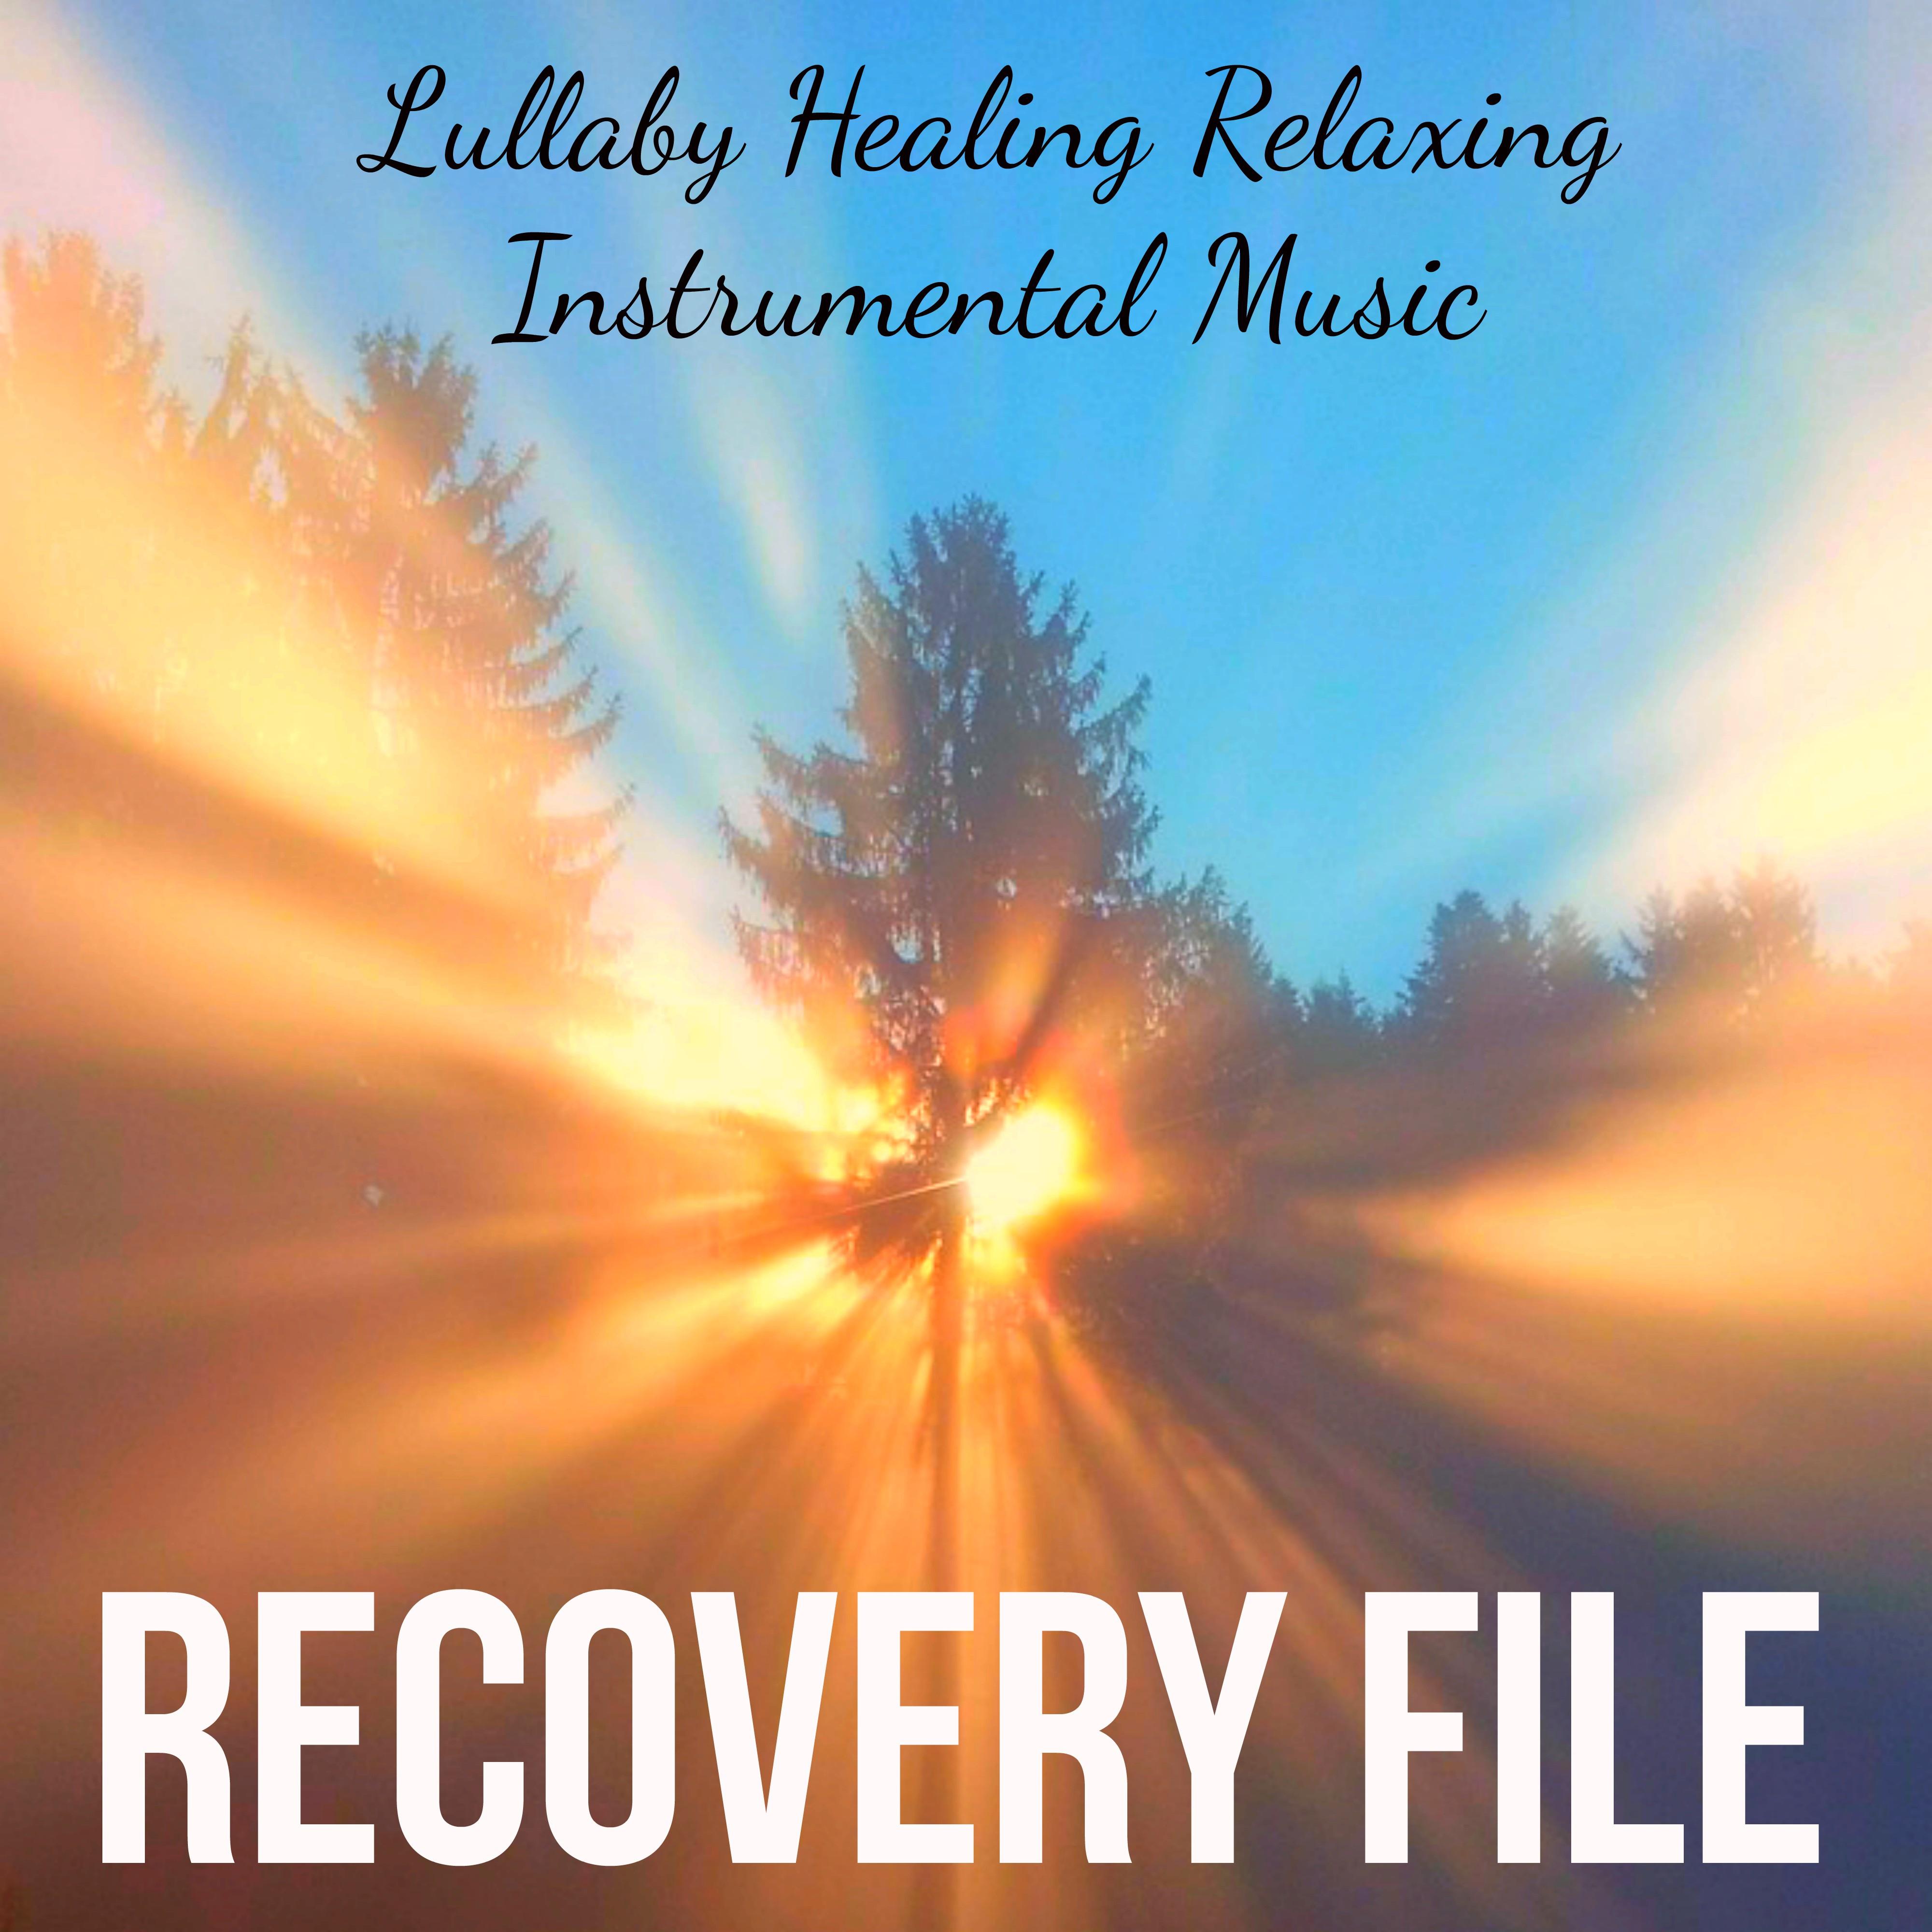 Recovery File - Lullaby Healing Relaxing Instrumental Music for Natural Therapy Sleep Cycle Yoga Exercises with Meditative New Age Spiritual Sounds